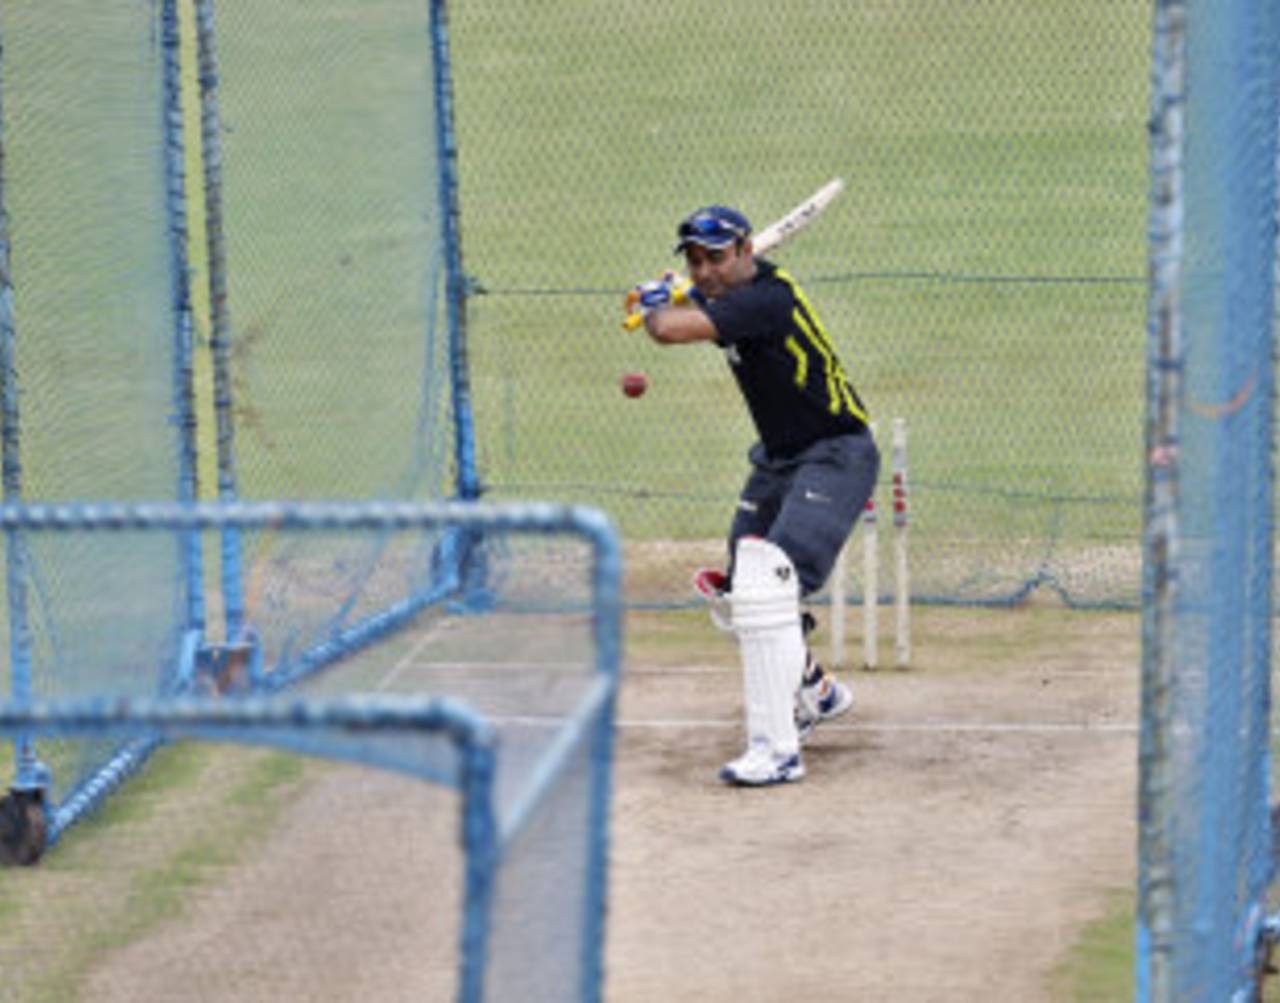 File photo - Virender Sehwag was hit by the first ball of pace he faced in the nets&nbsp;&nbsp;&bull;&nbsp;&nbsp;Associated Press